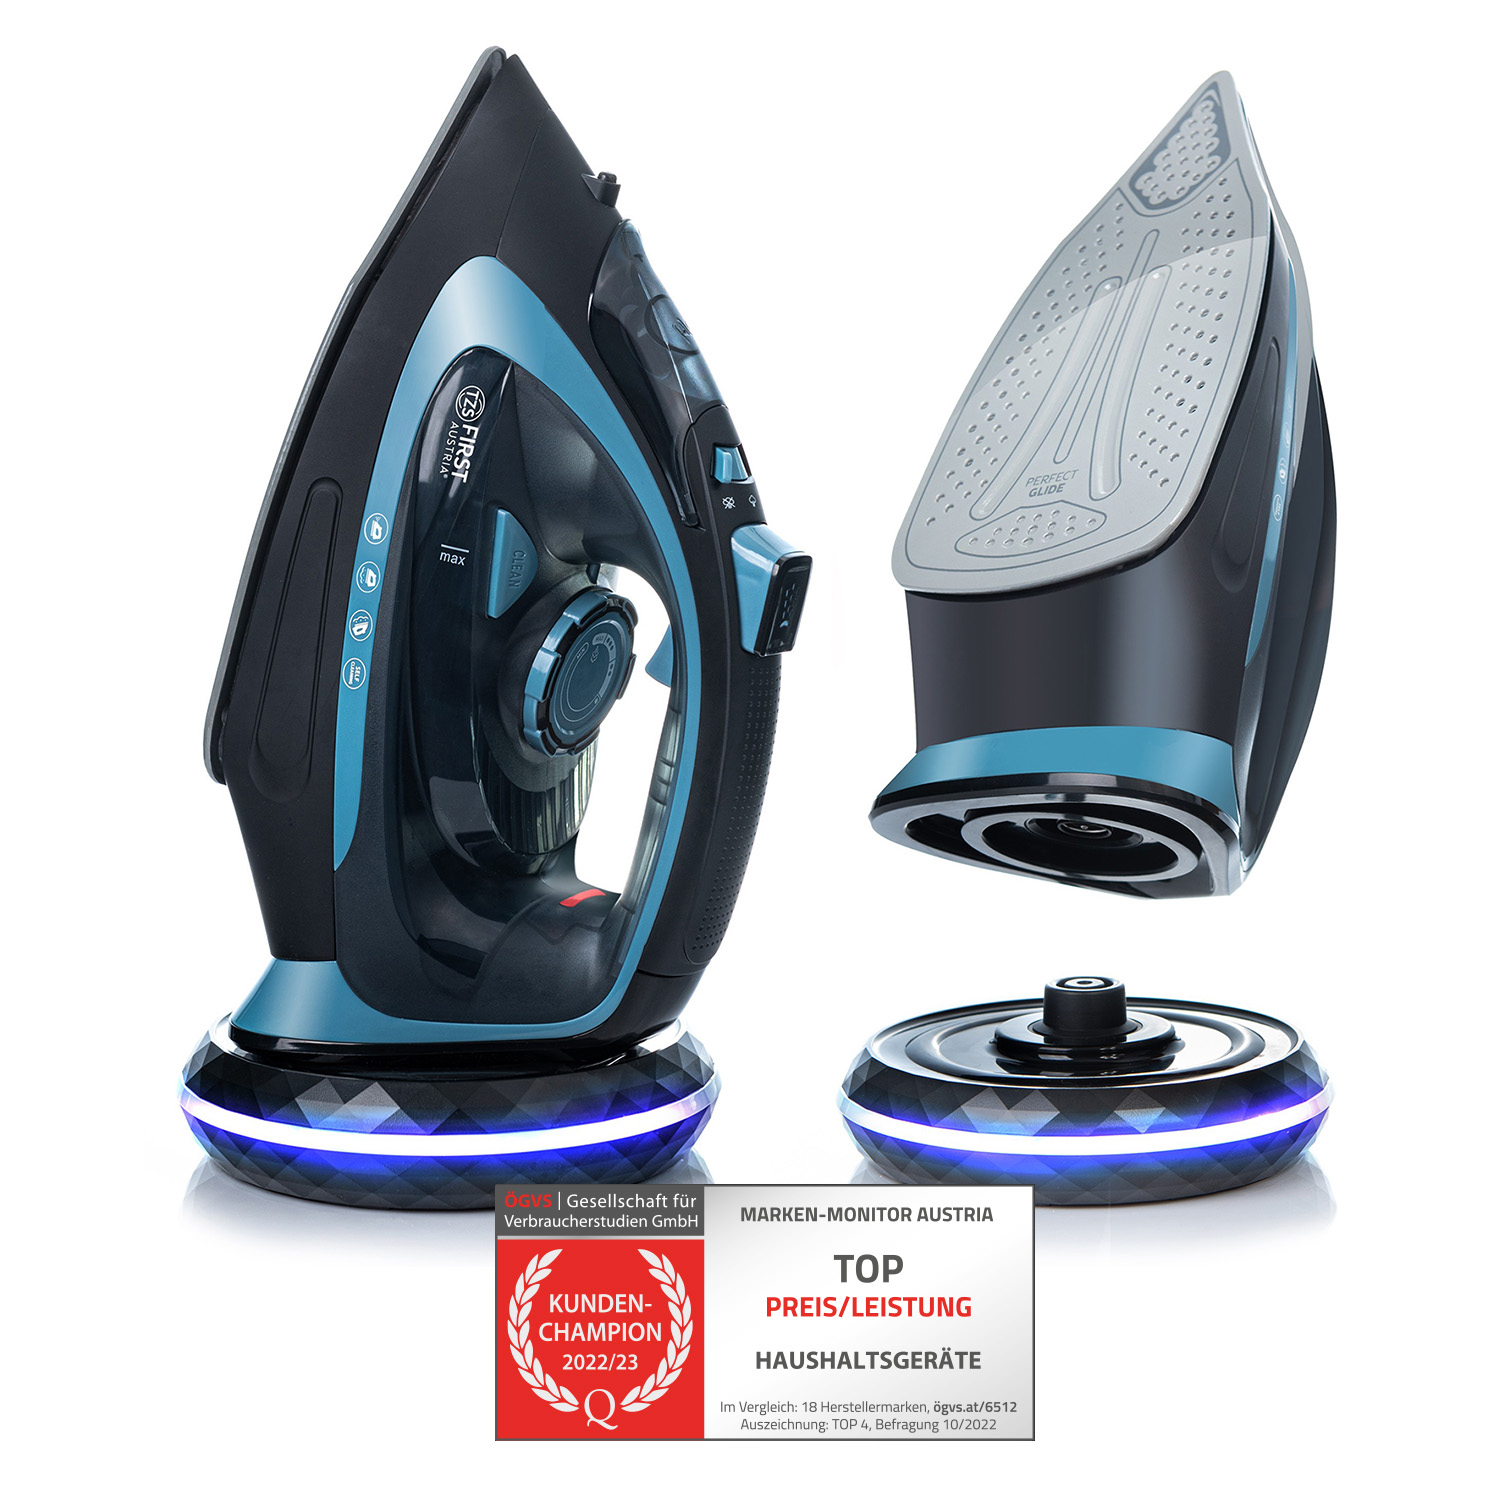 Steam iron | cordless with ironing station